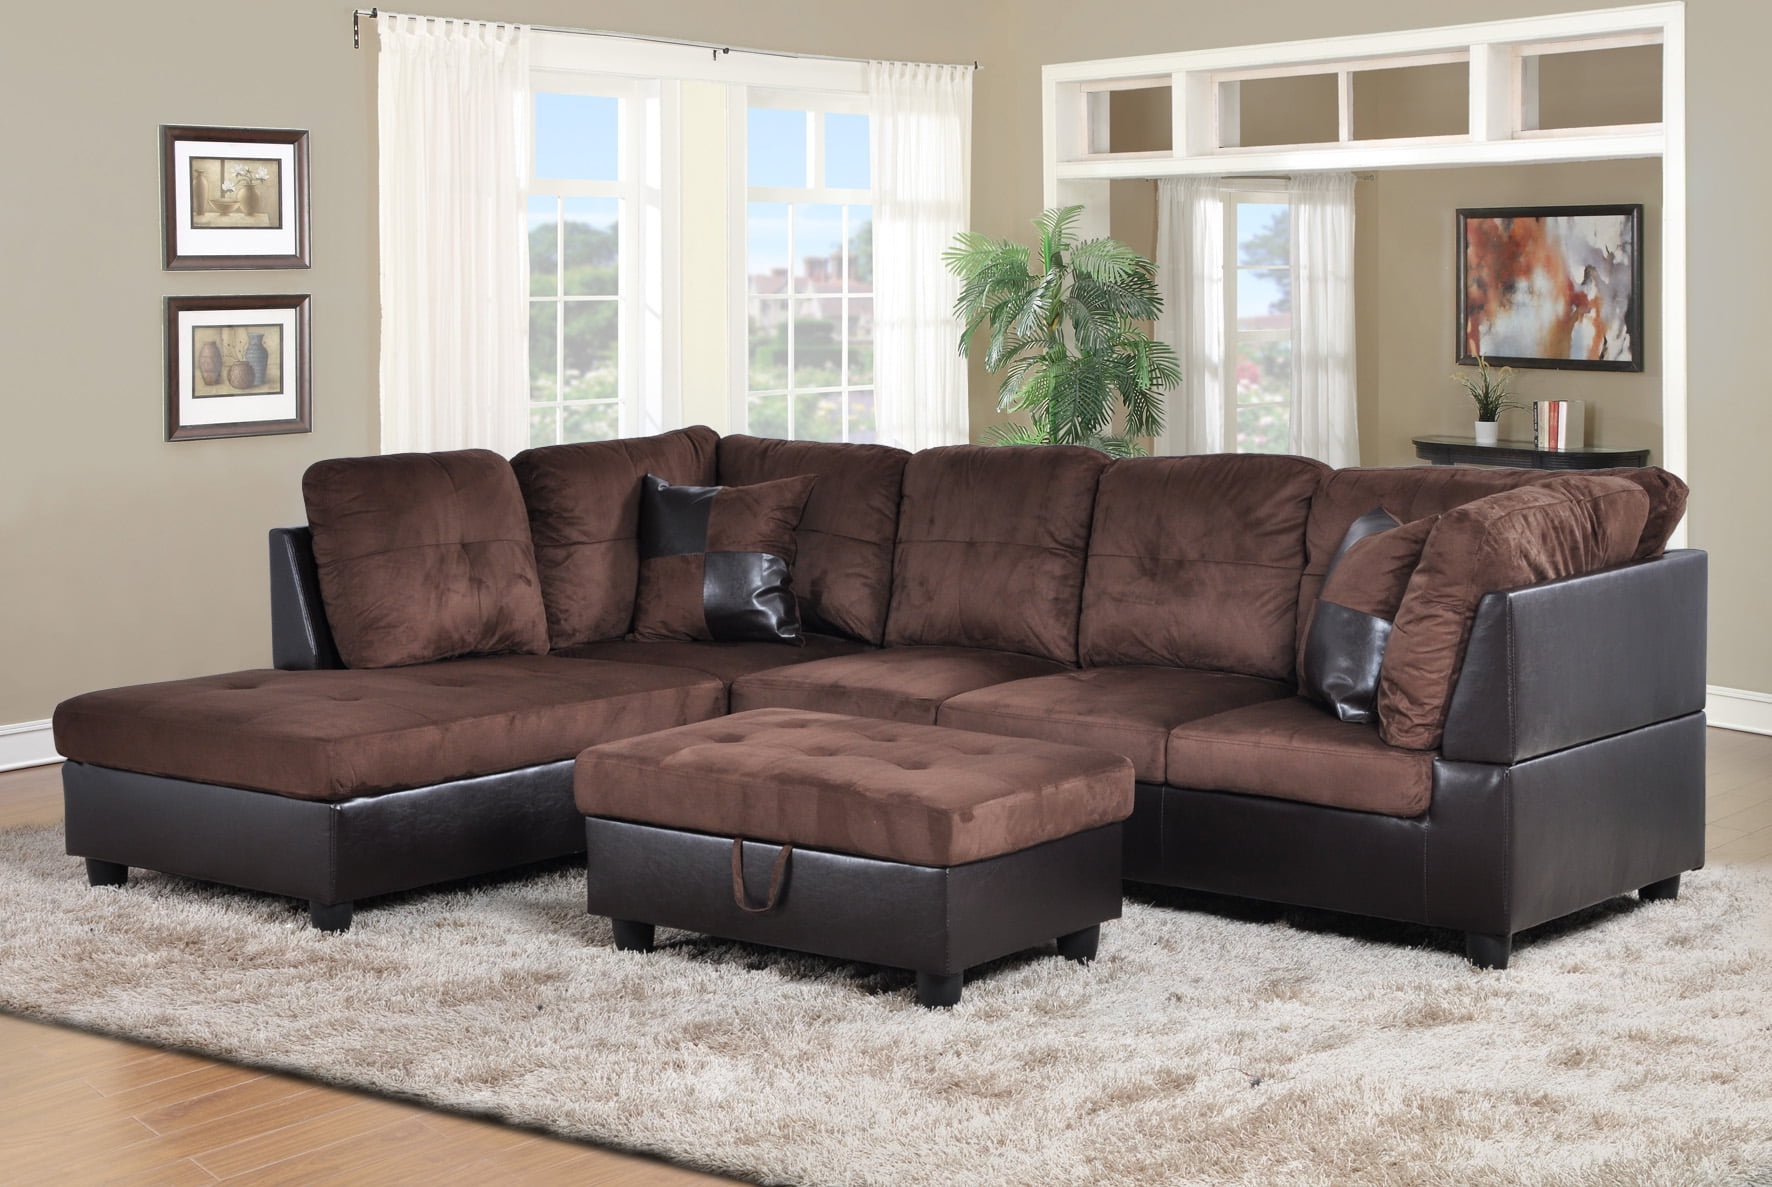 Hermann Left Chaise Sectional Sofa With Storage Ottoman Chocolate